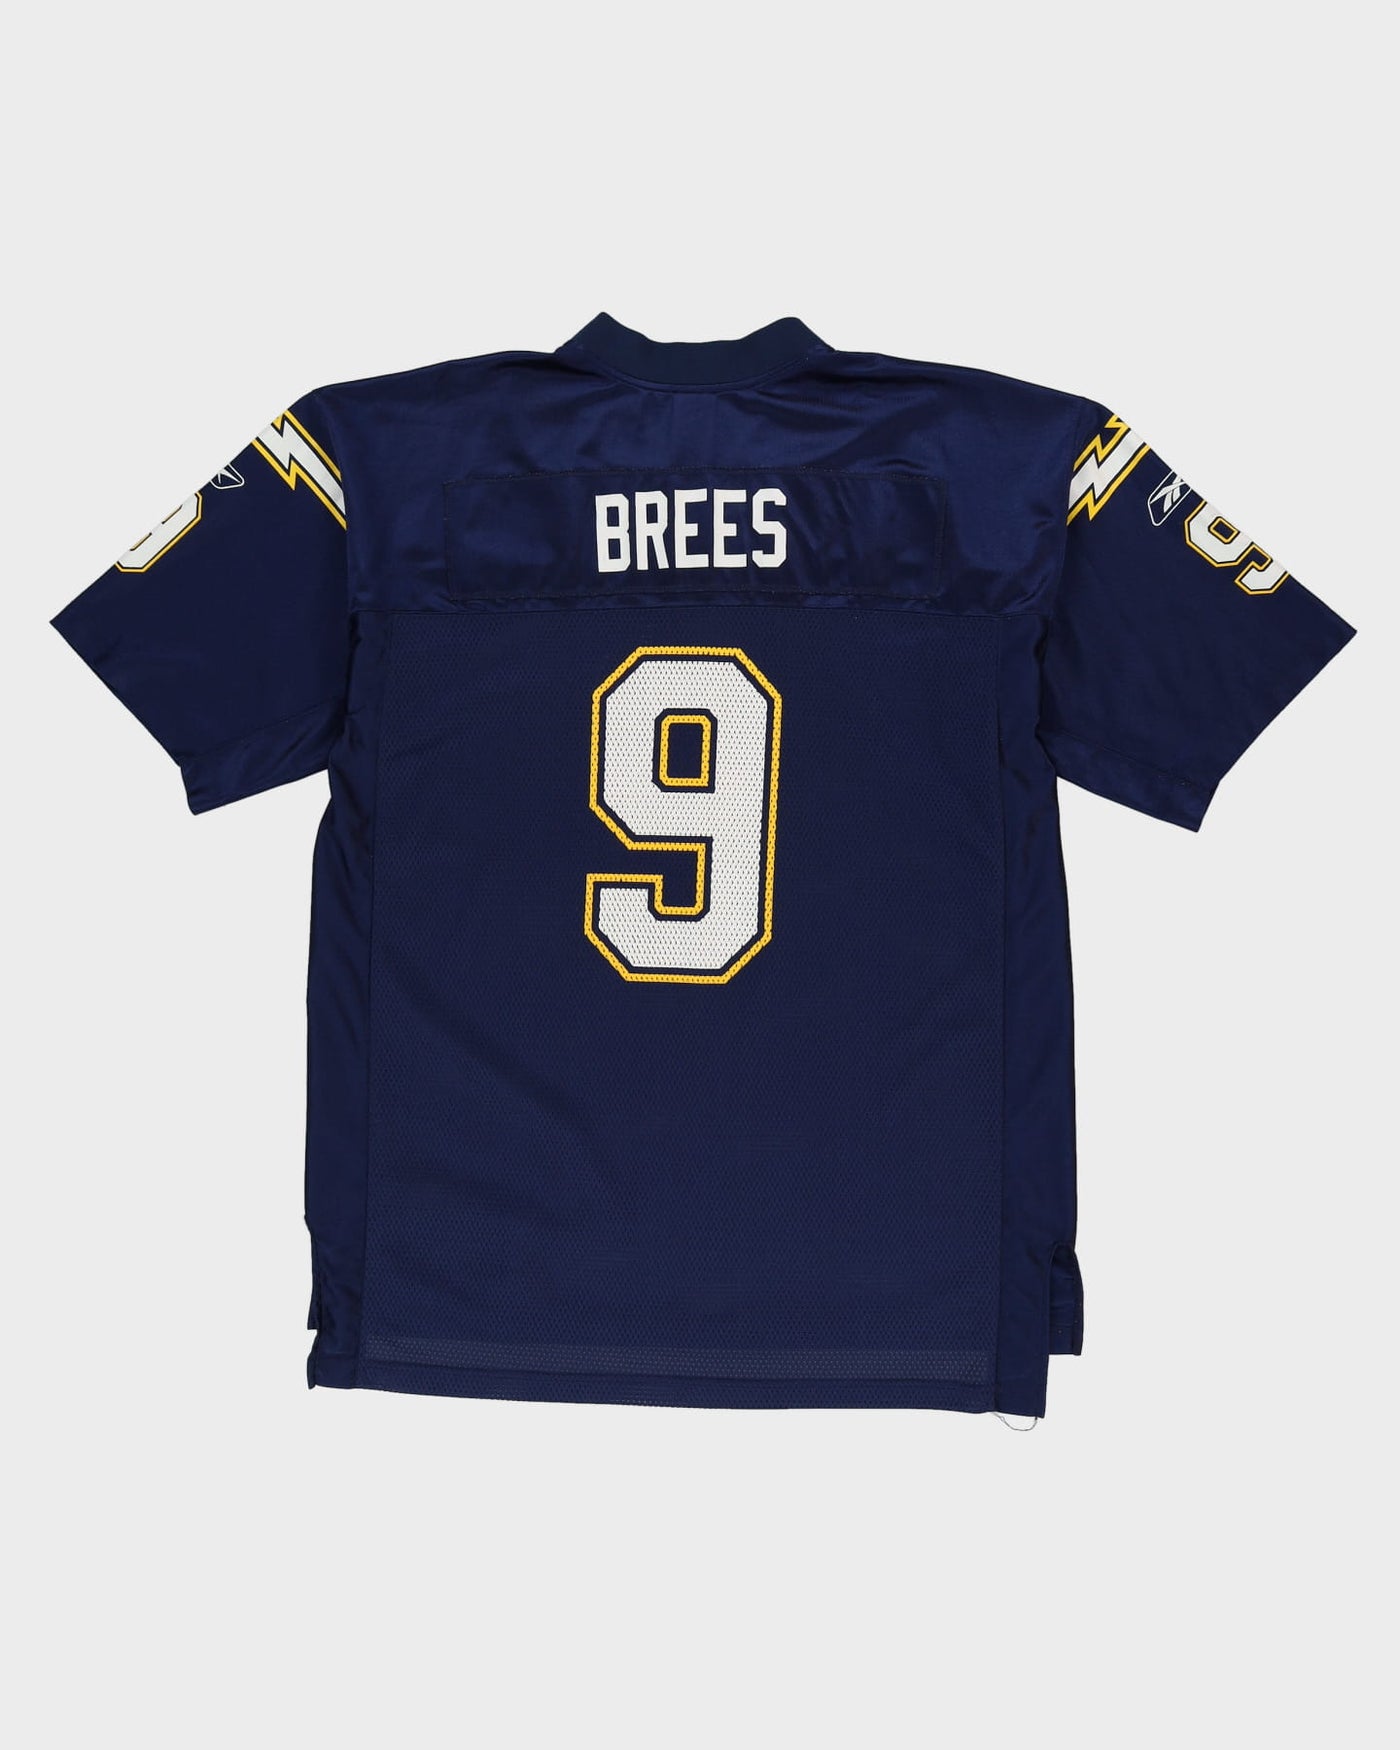 Drew Brees #9 San Diego Chargers Navy NFL American Football Jersey - L